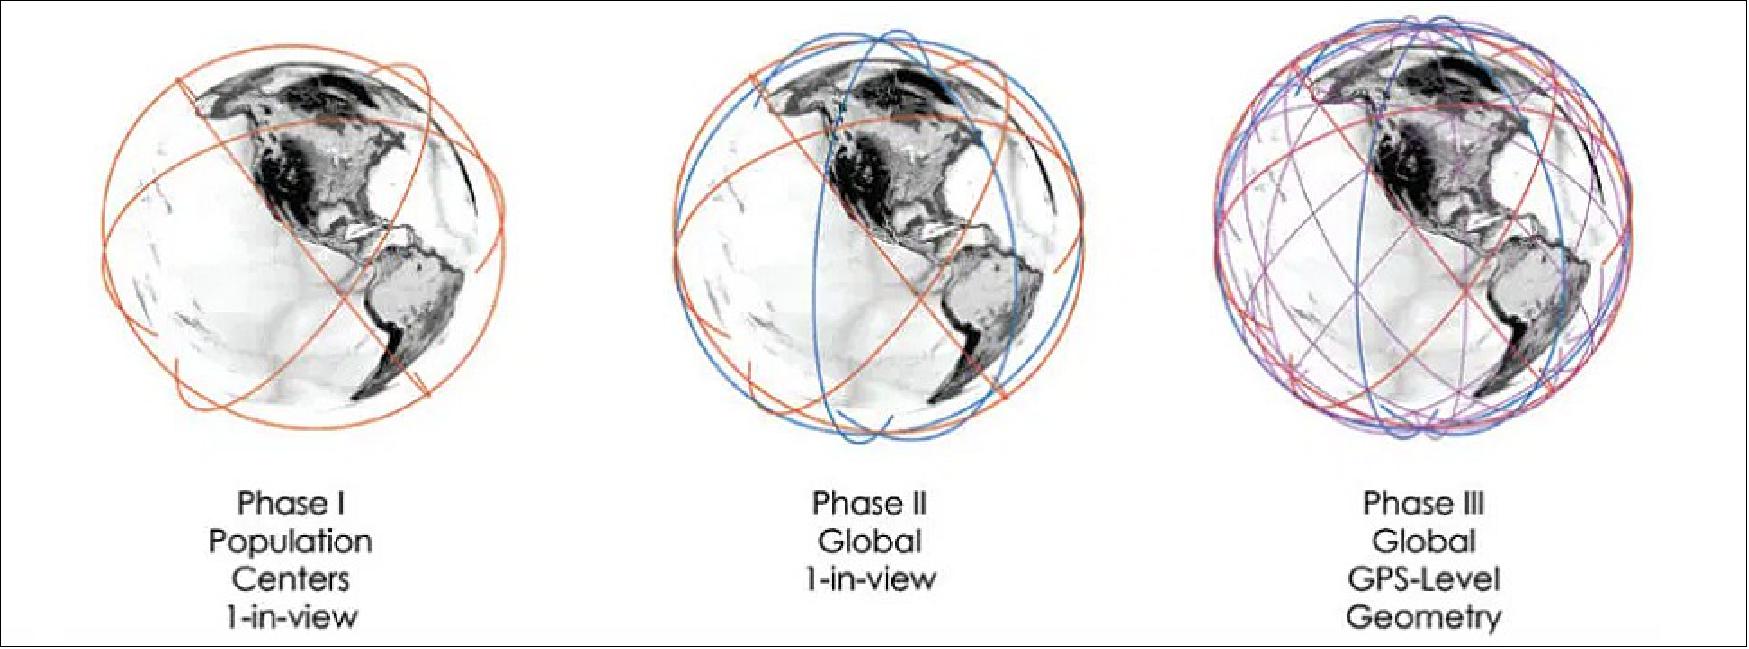 Figure 2: The Xona Pulsar system constellation roll out and configuration (image credit: Xona)